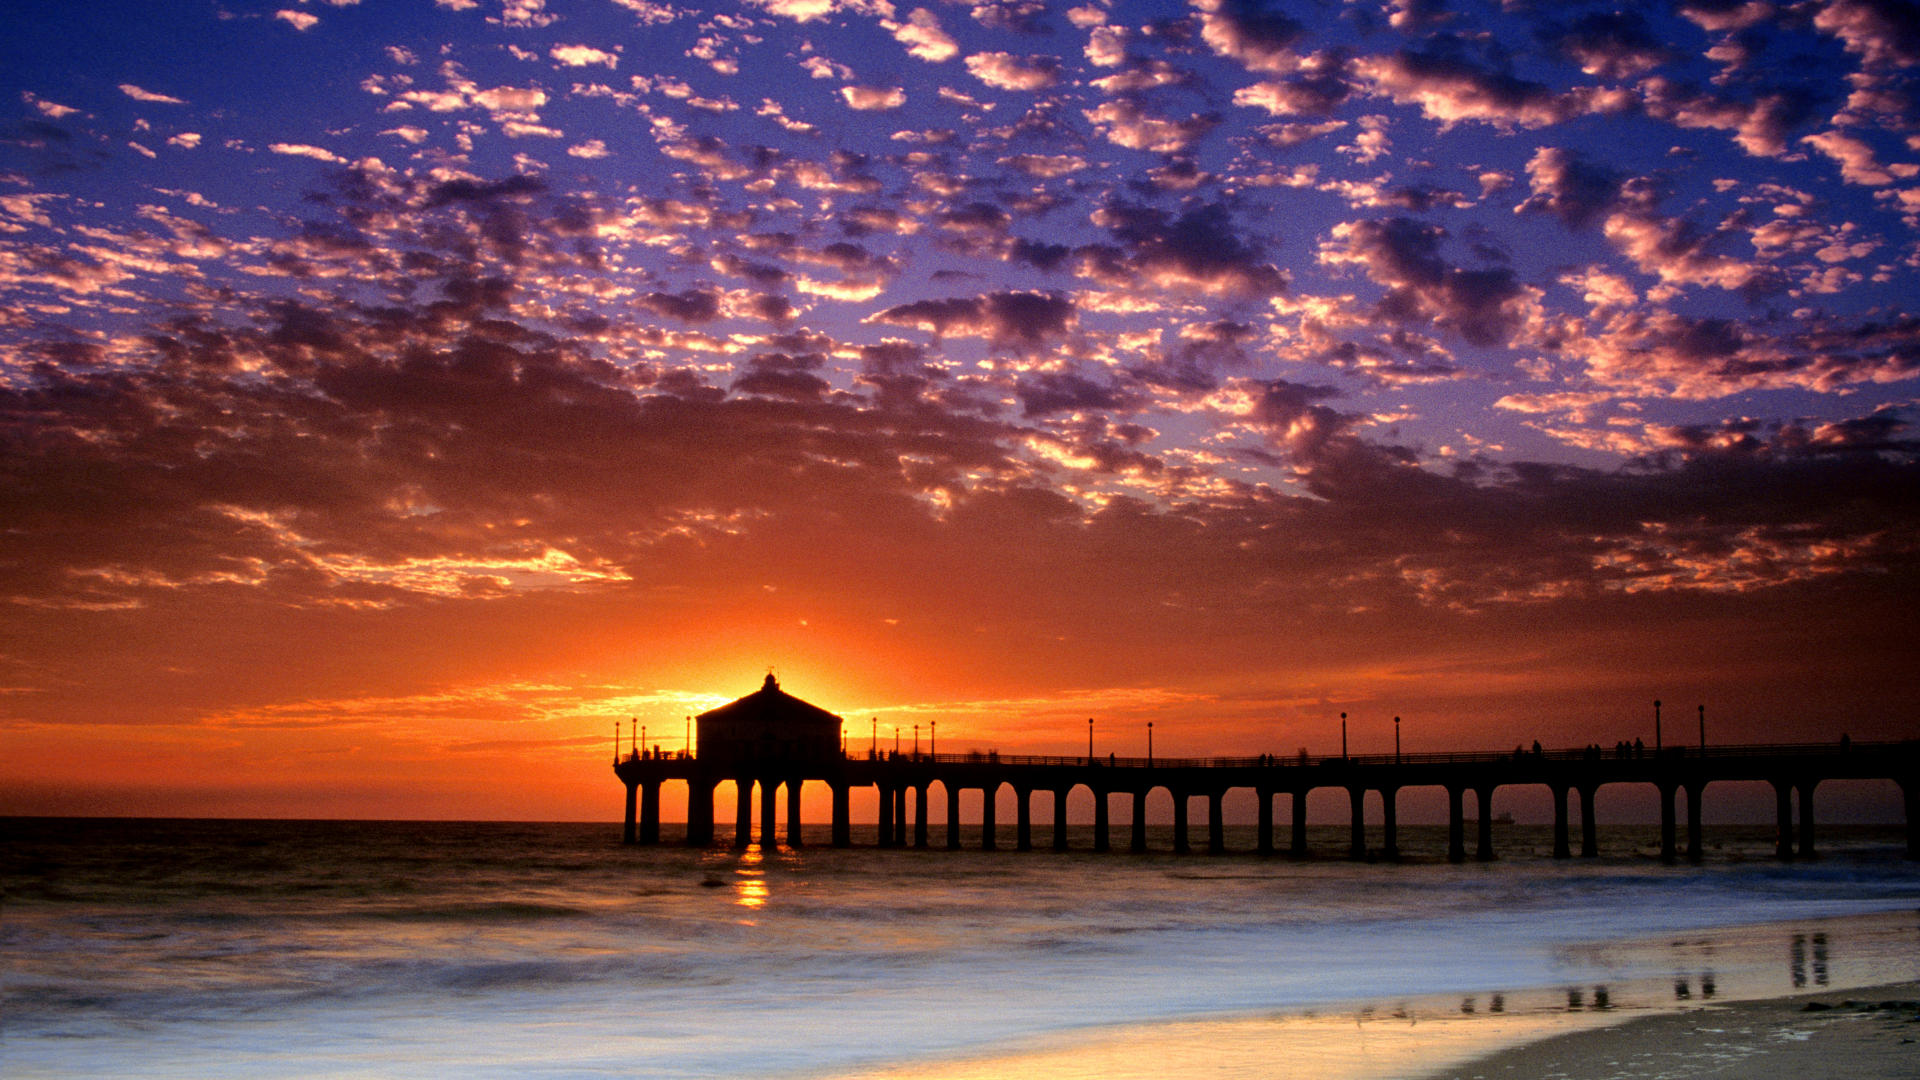  wallpapers california beach colorful sky manhattan backgrounds